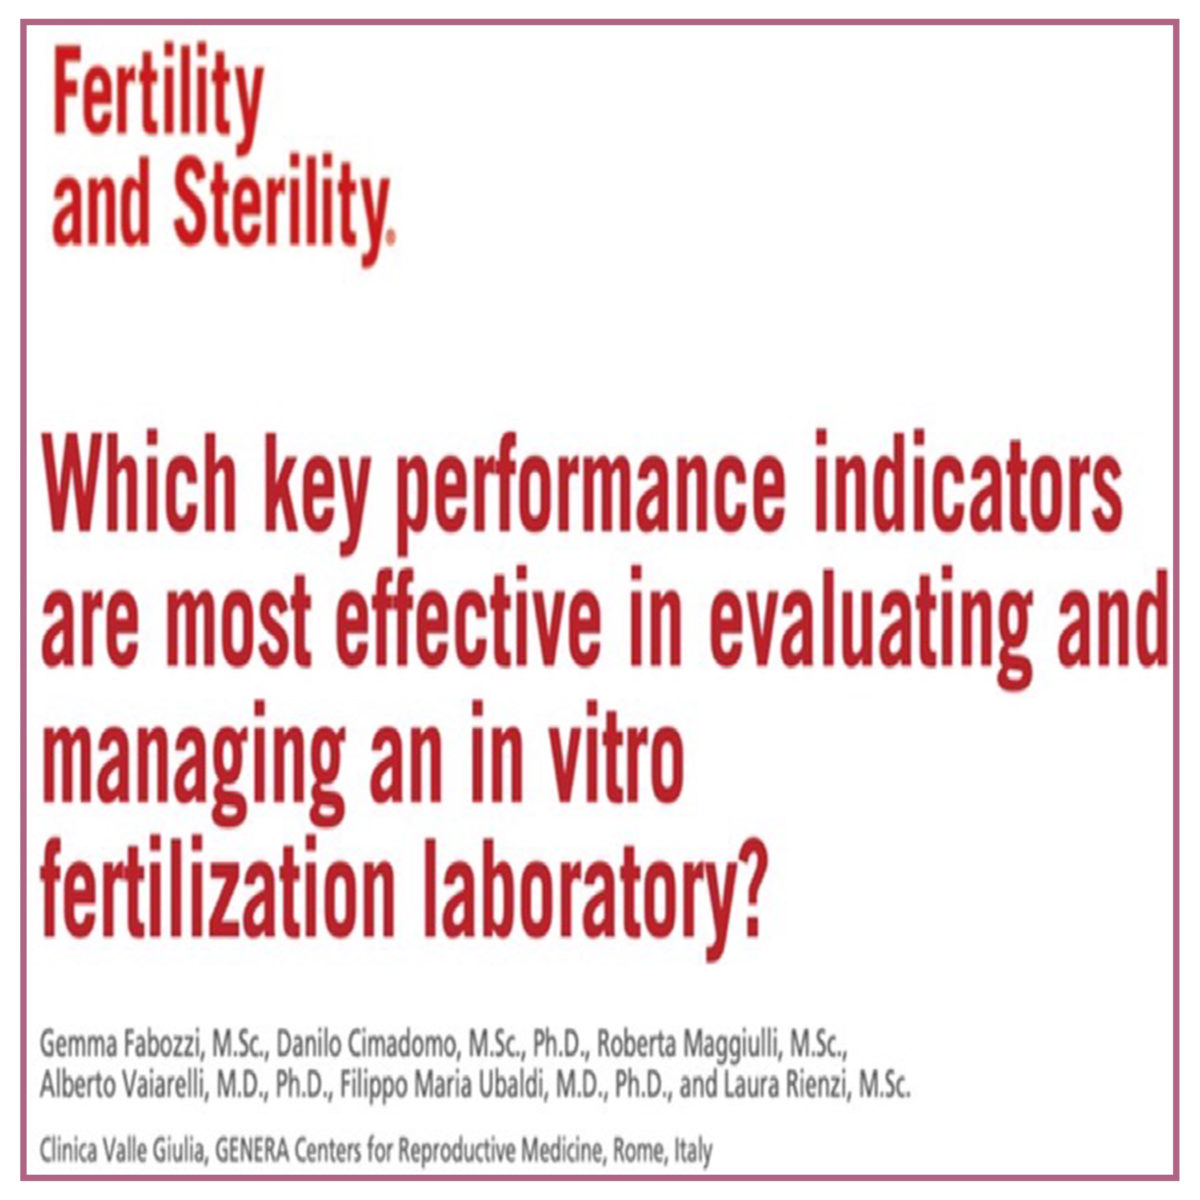 Which-key-performance-indicators-are-most-effective-in-evaluating-and-managing-an-in-vitro-fertilization-laboratory-Dr.ssa-Gemma-Fabozzi--1200x1200.jpg